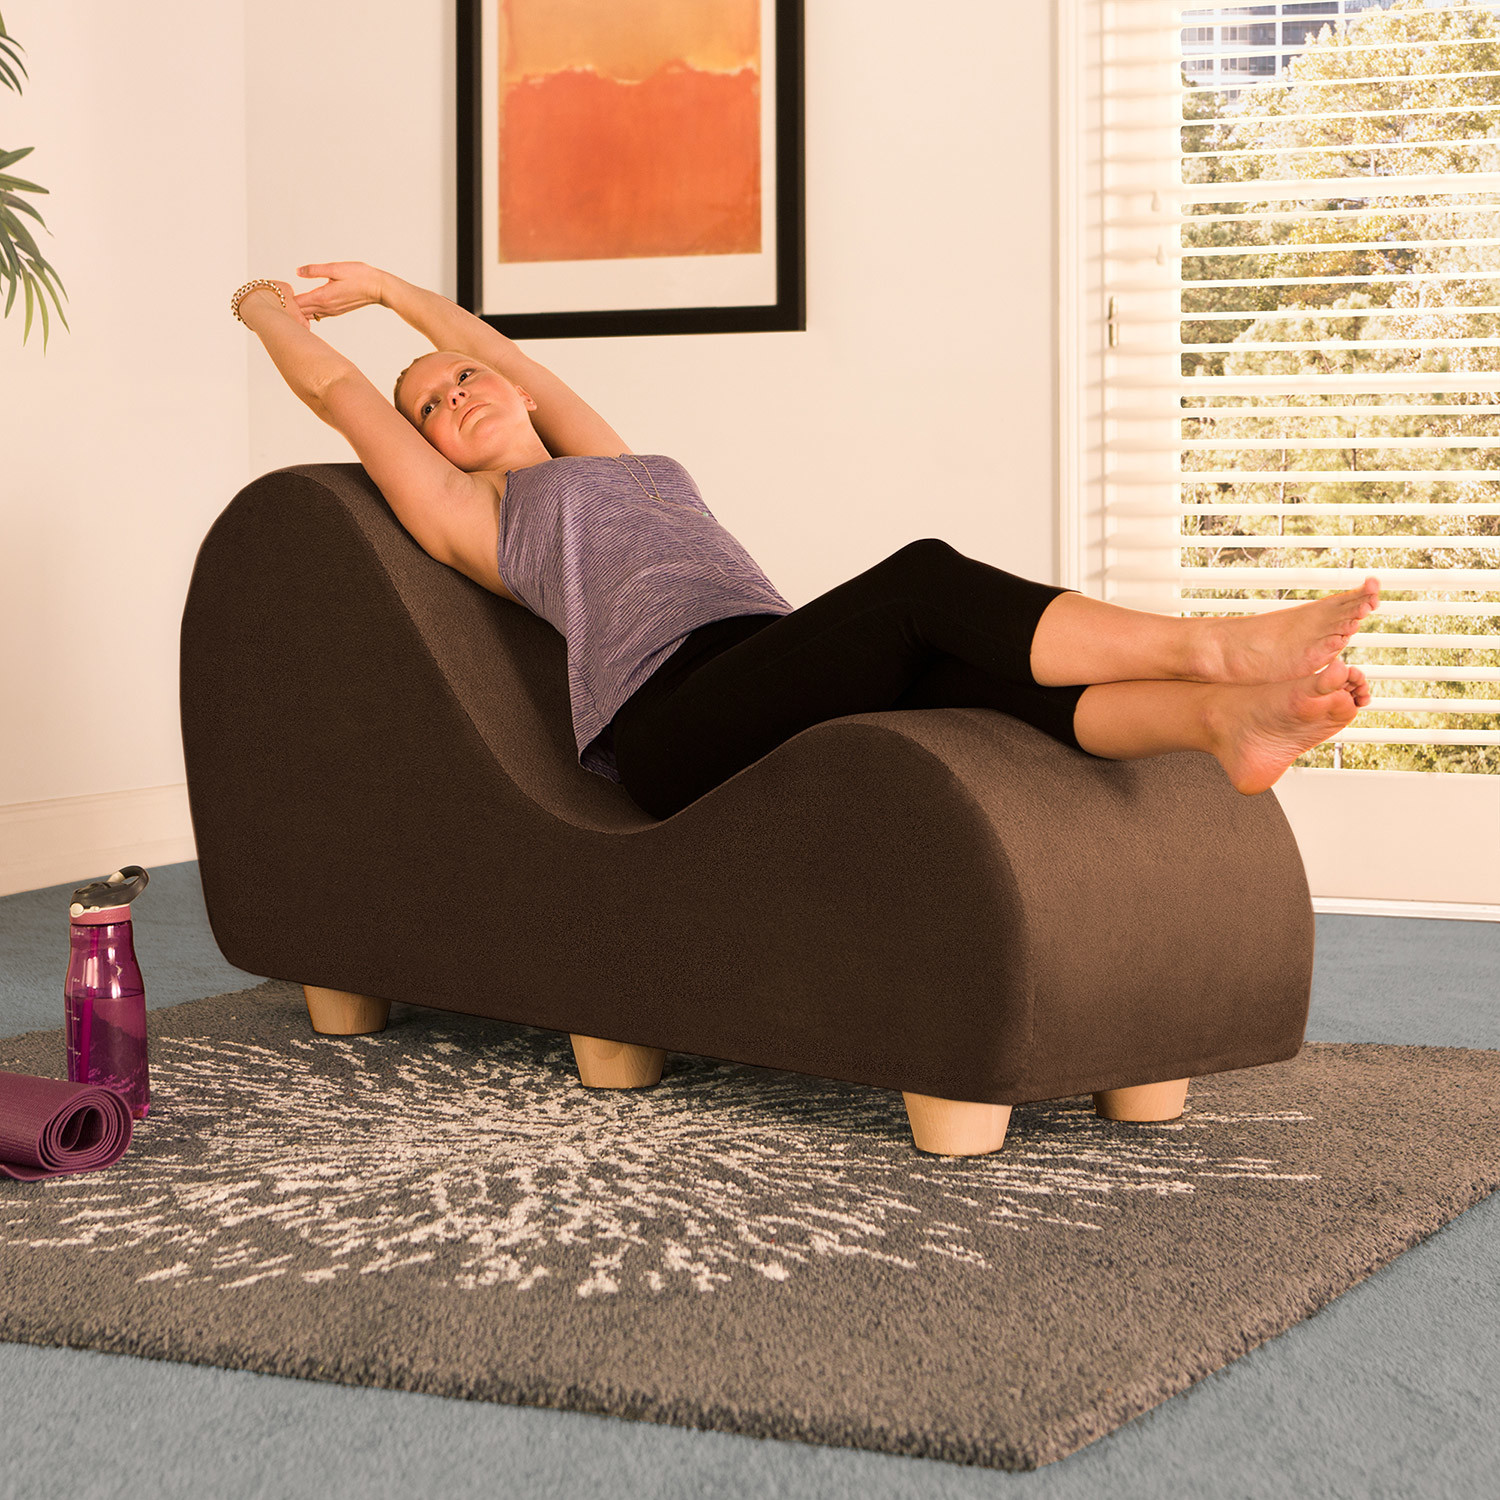 Yoga Chaise Lounge Walmart Yoga Chaise Lounges Are Primarily Marketed